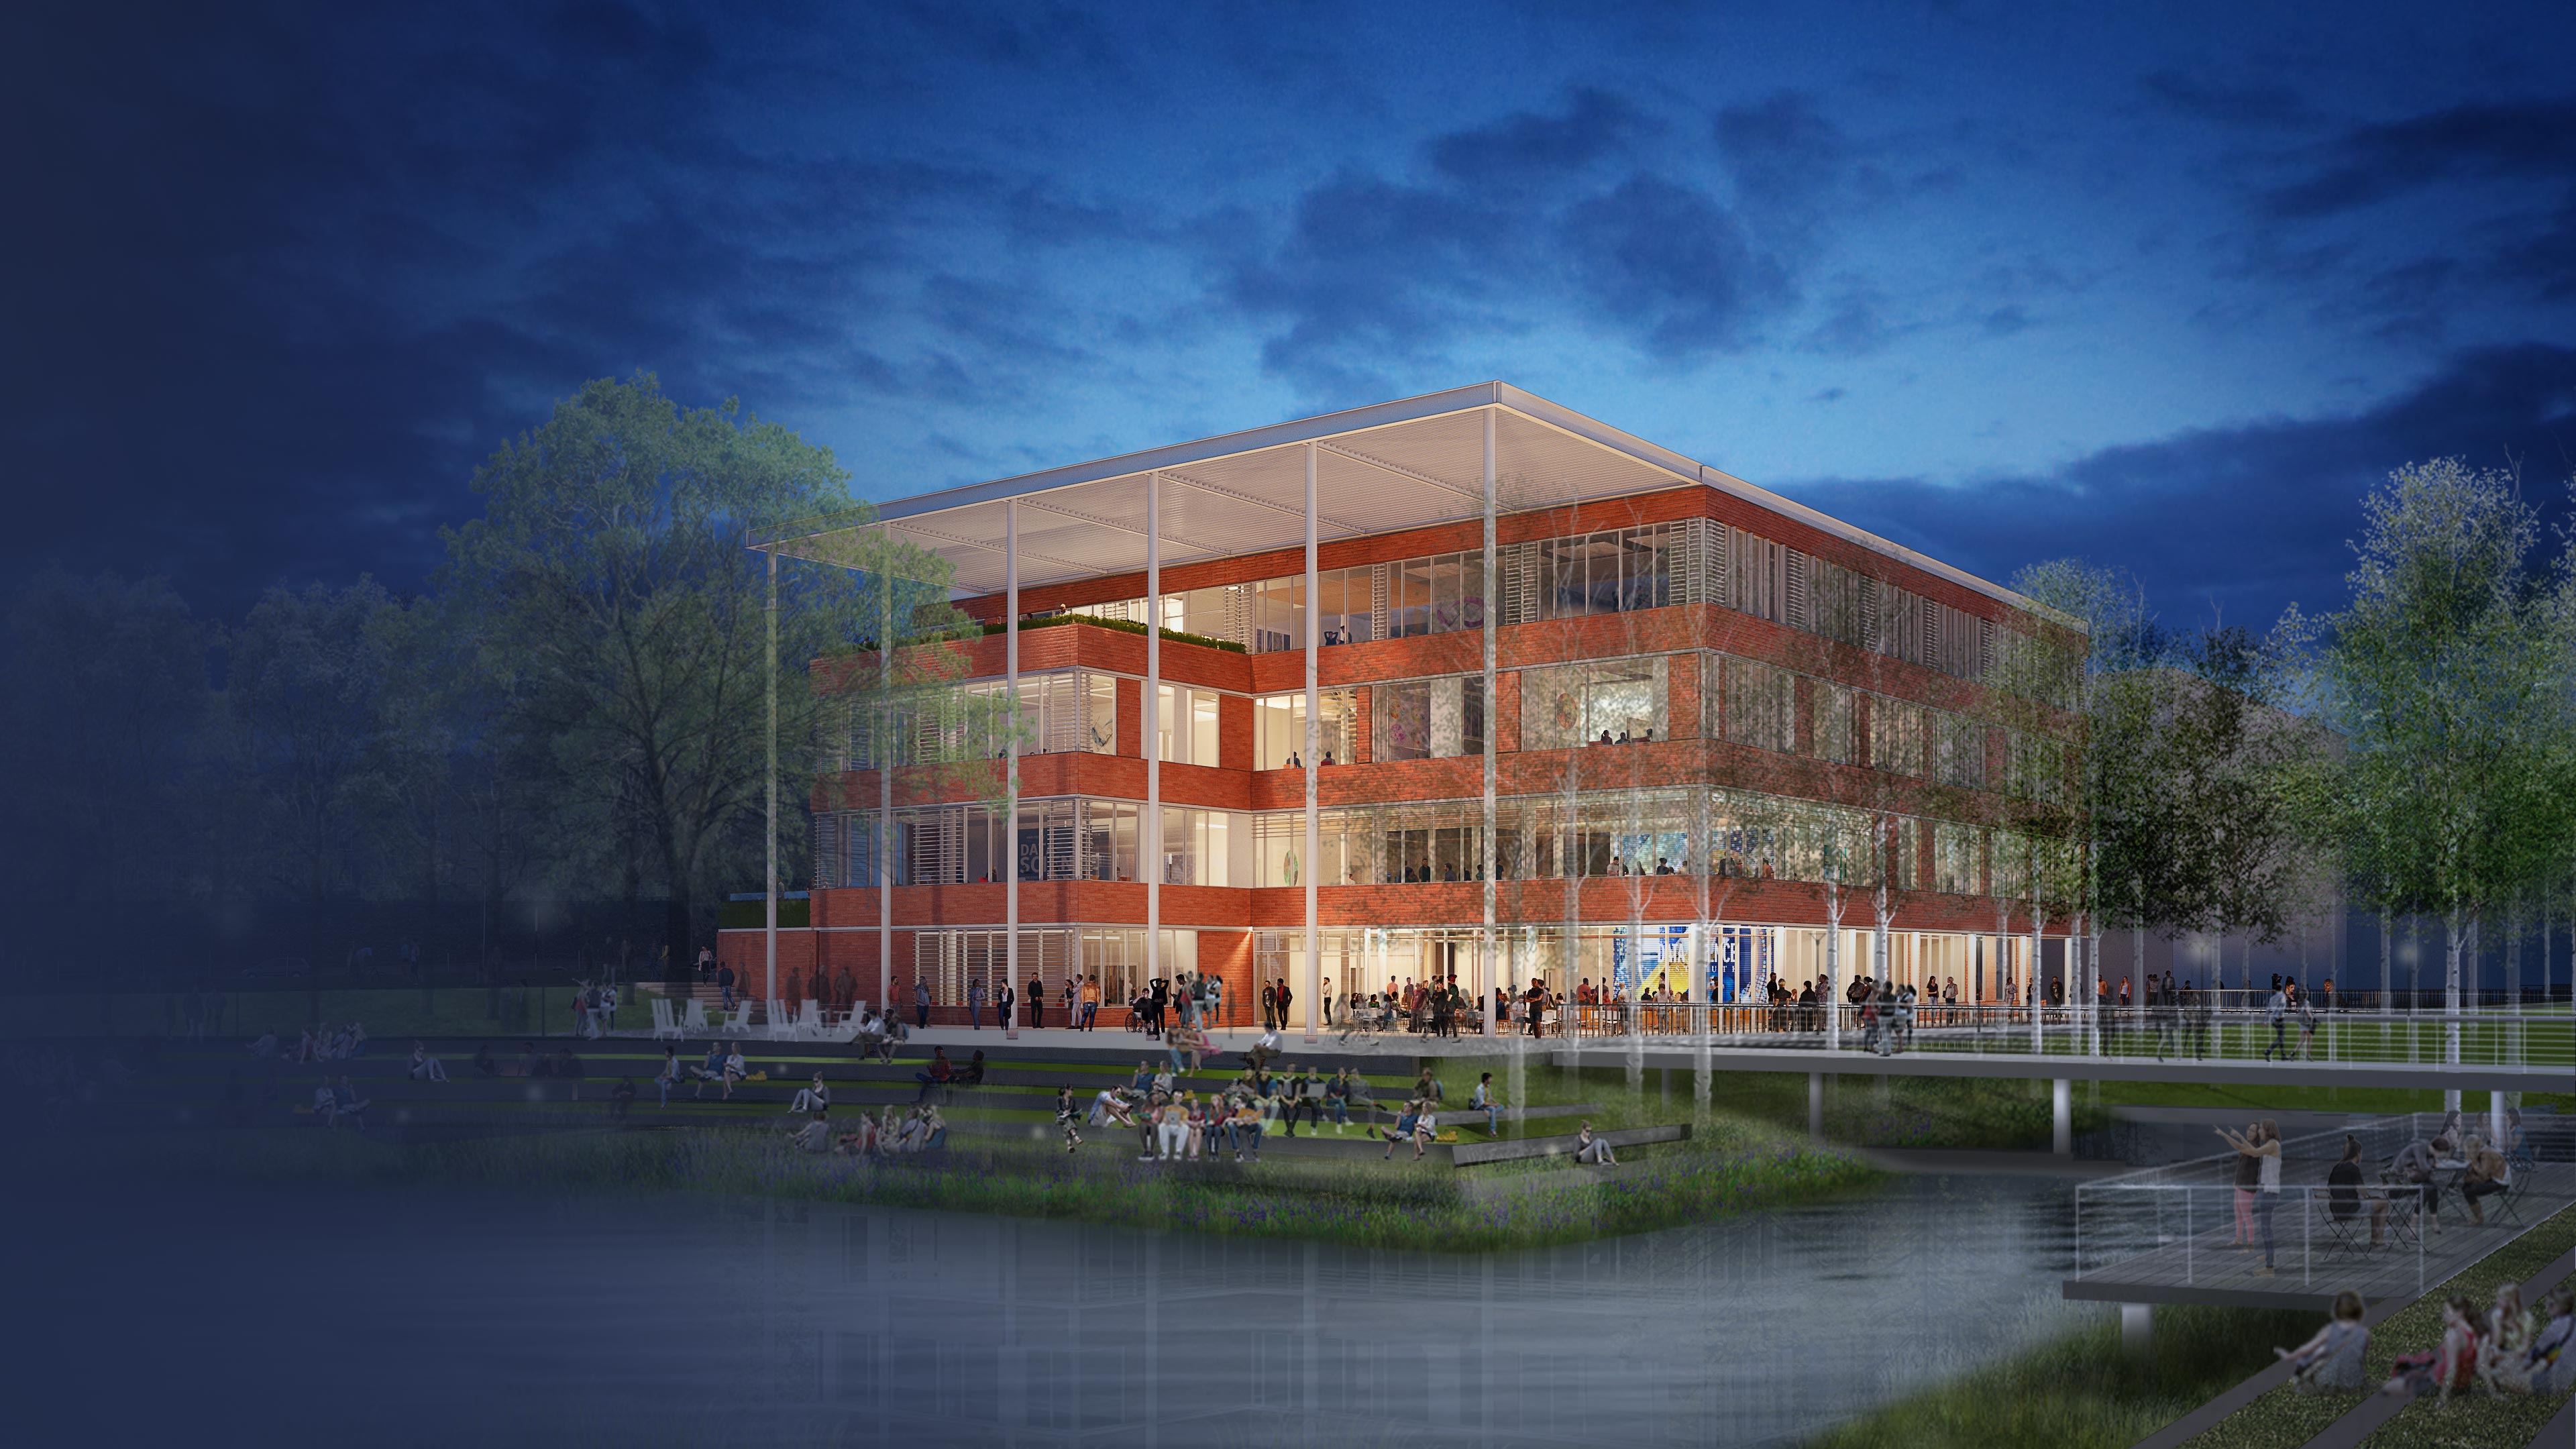 Proposed Data Science Building at Night